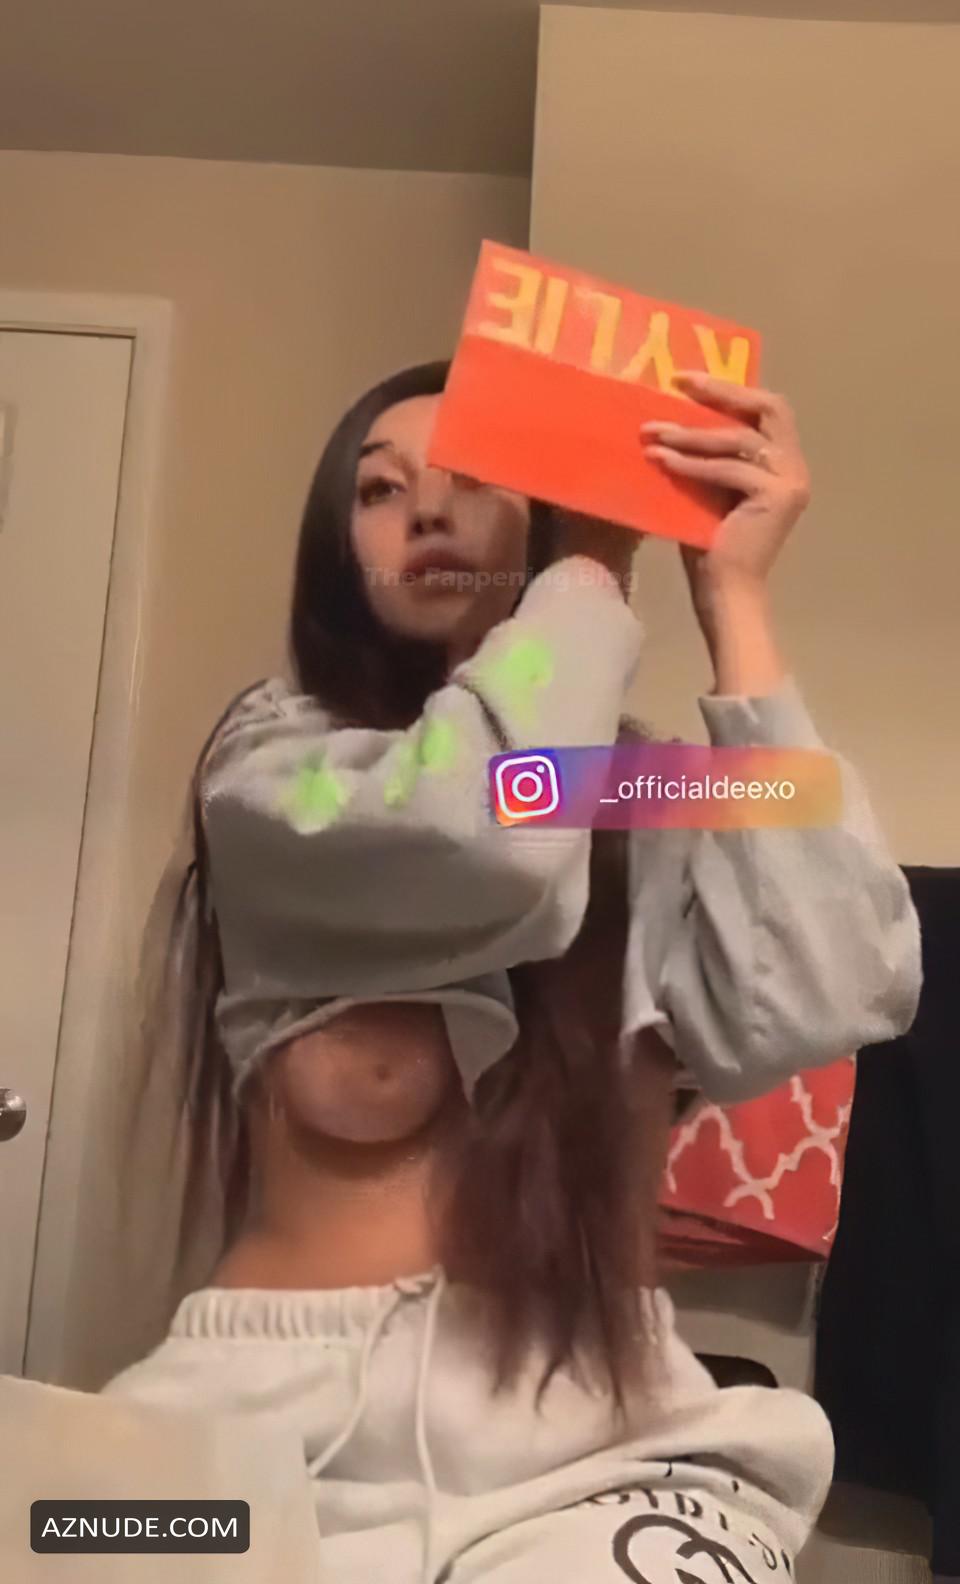 Instagram live nude The sexiest